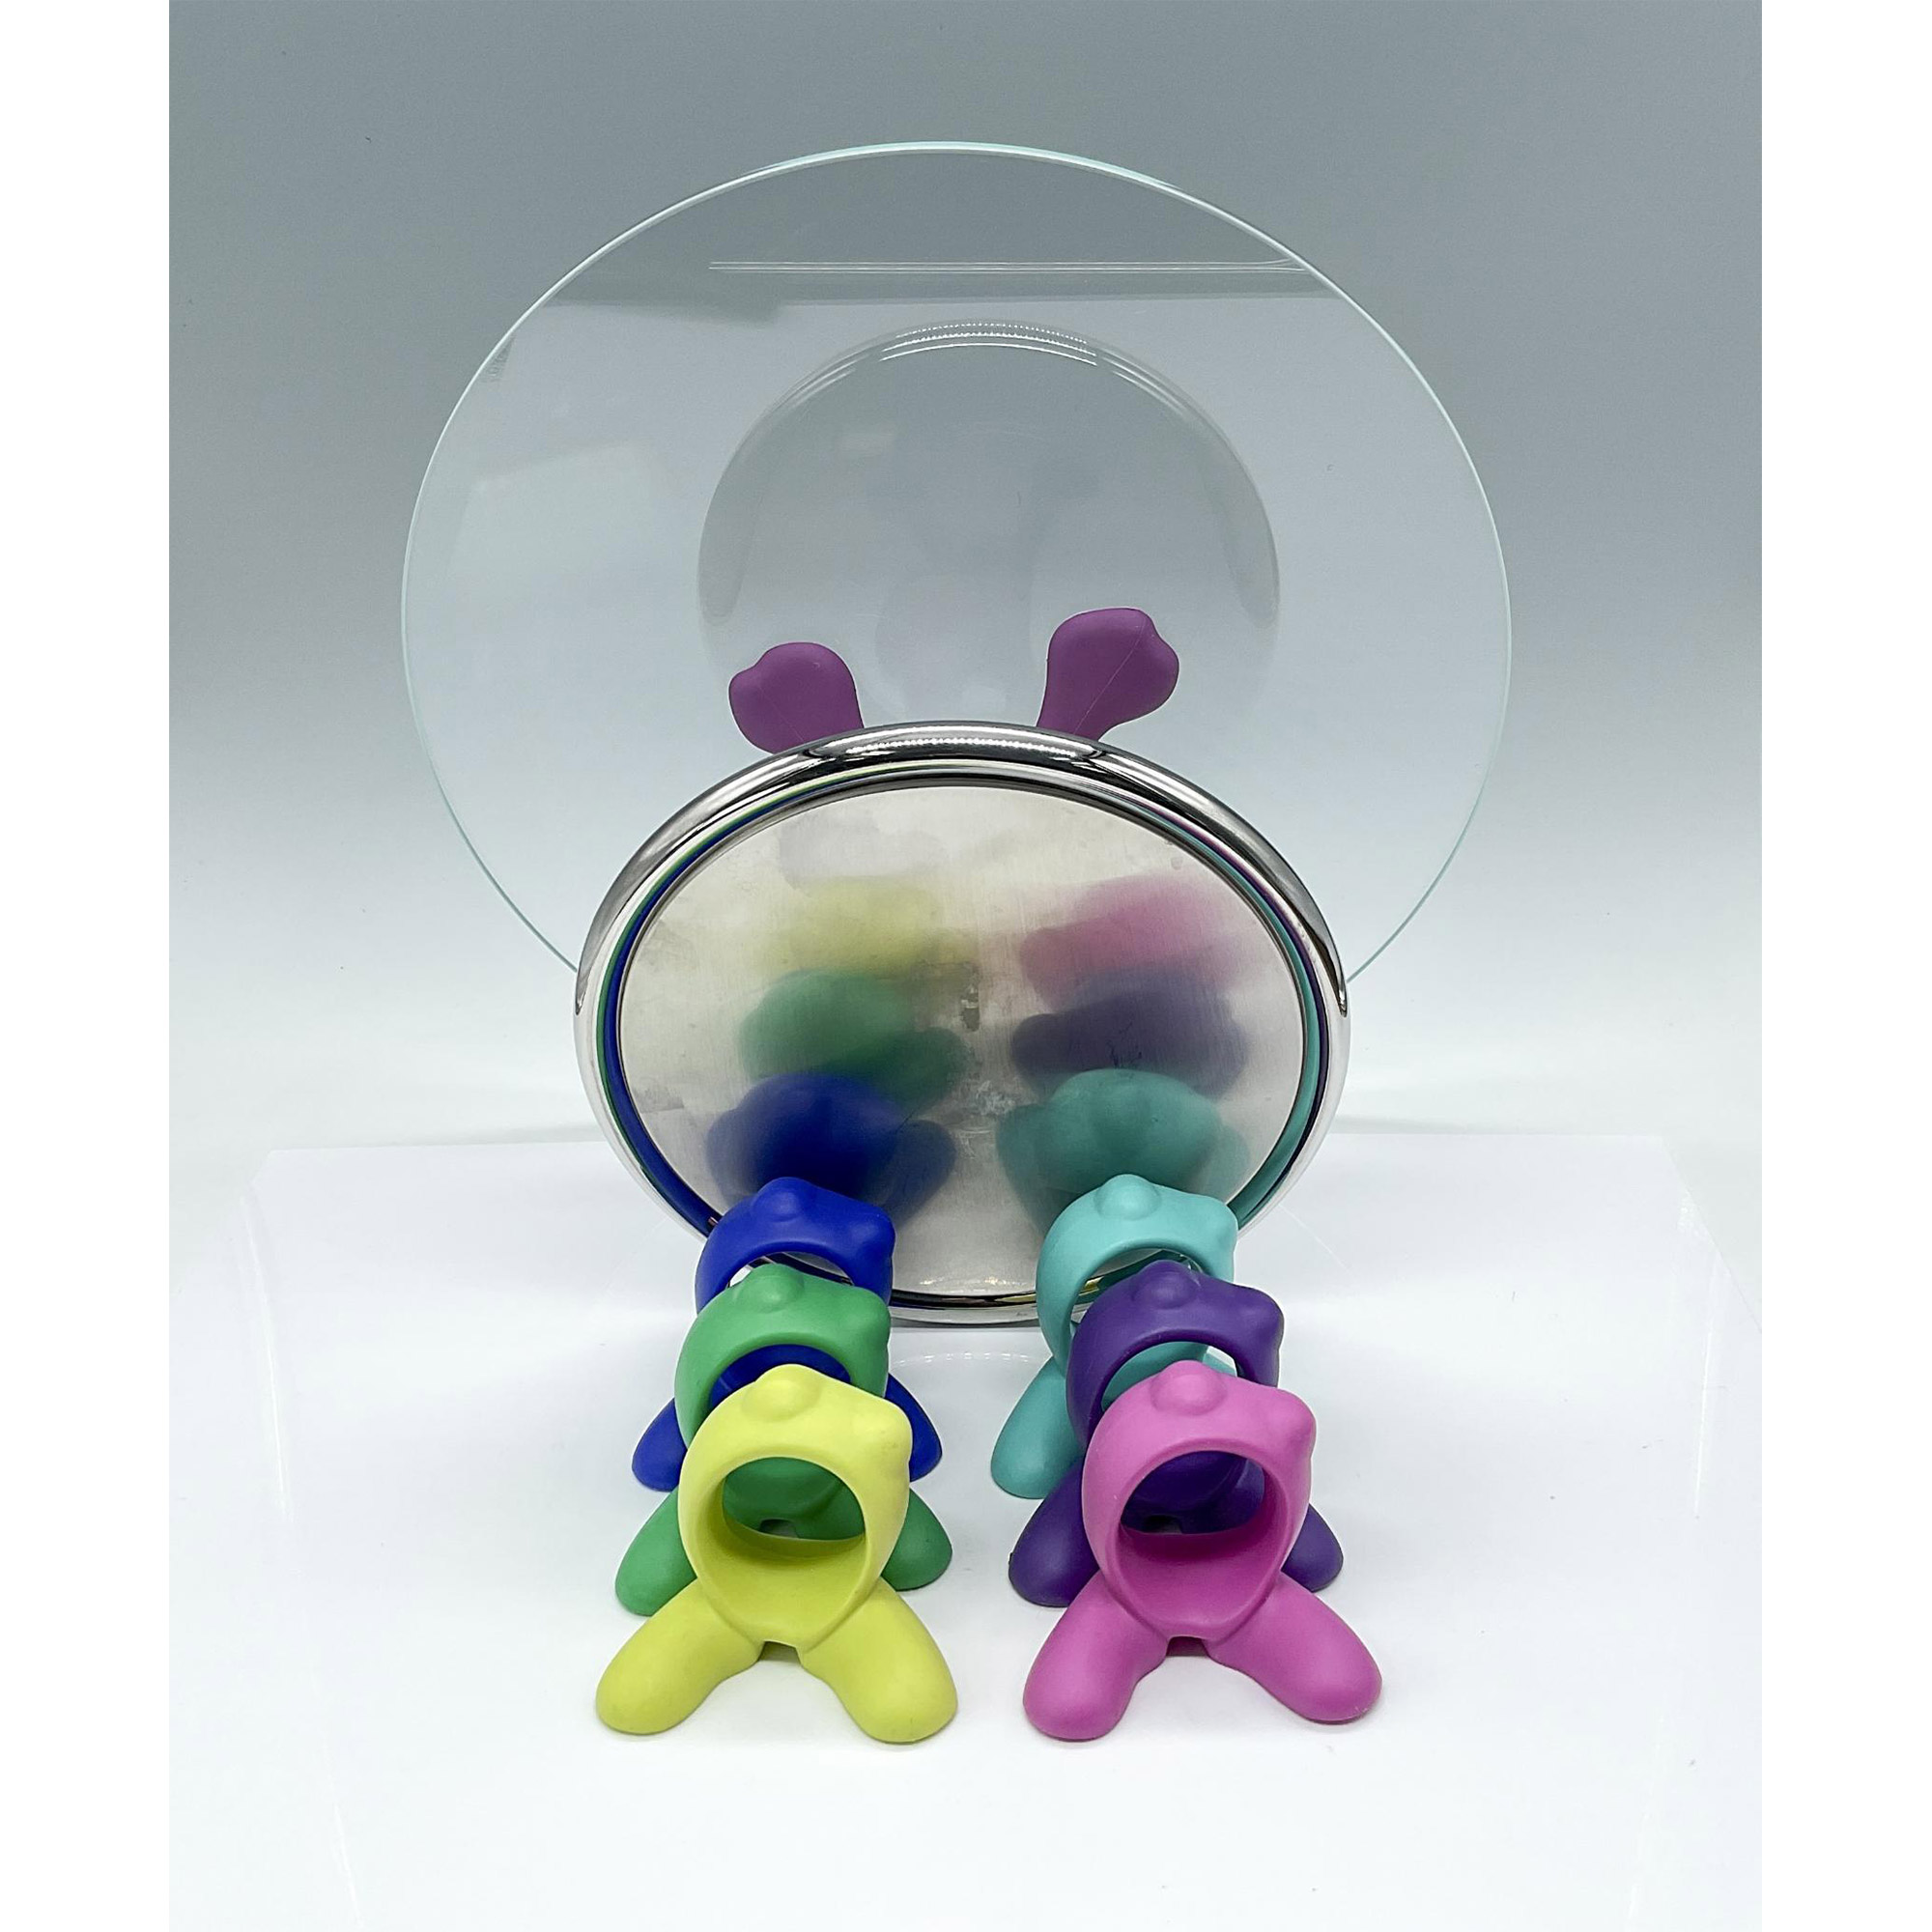 7pc Alessi Colorful Napkin Rings and Cake Stand - Image 3 of 4